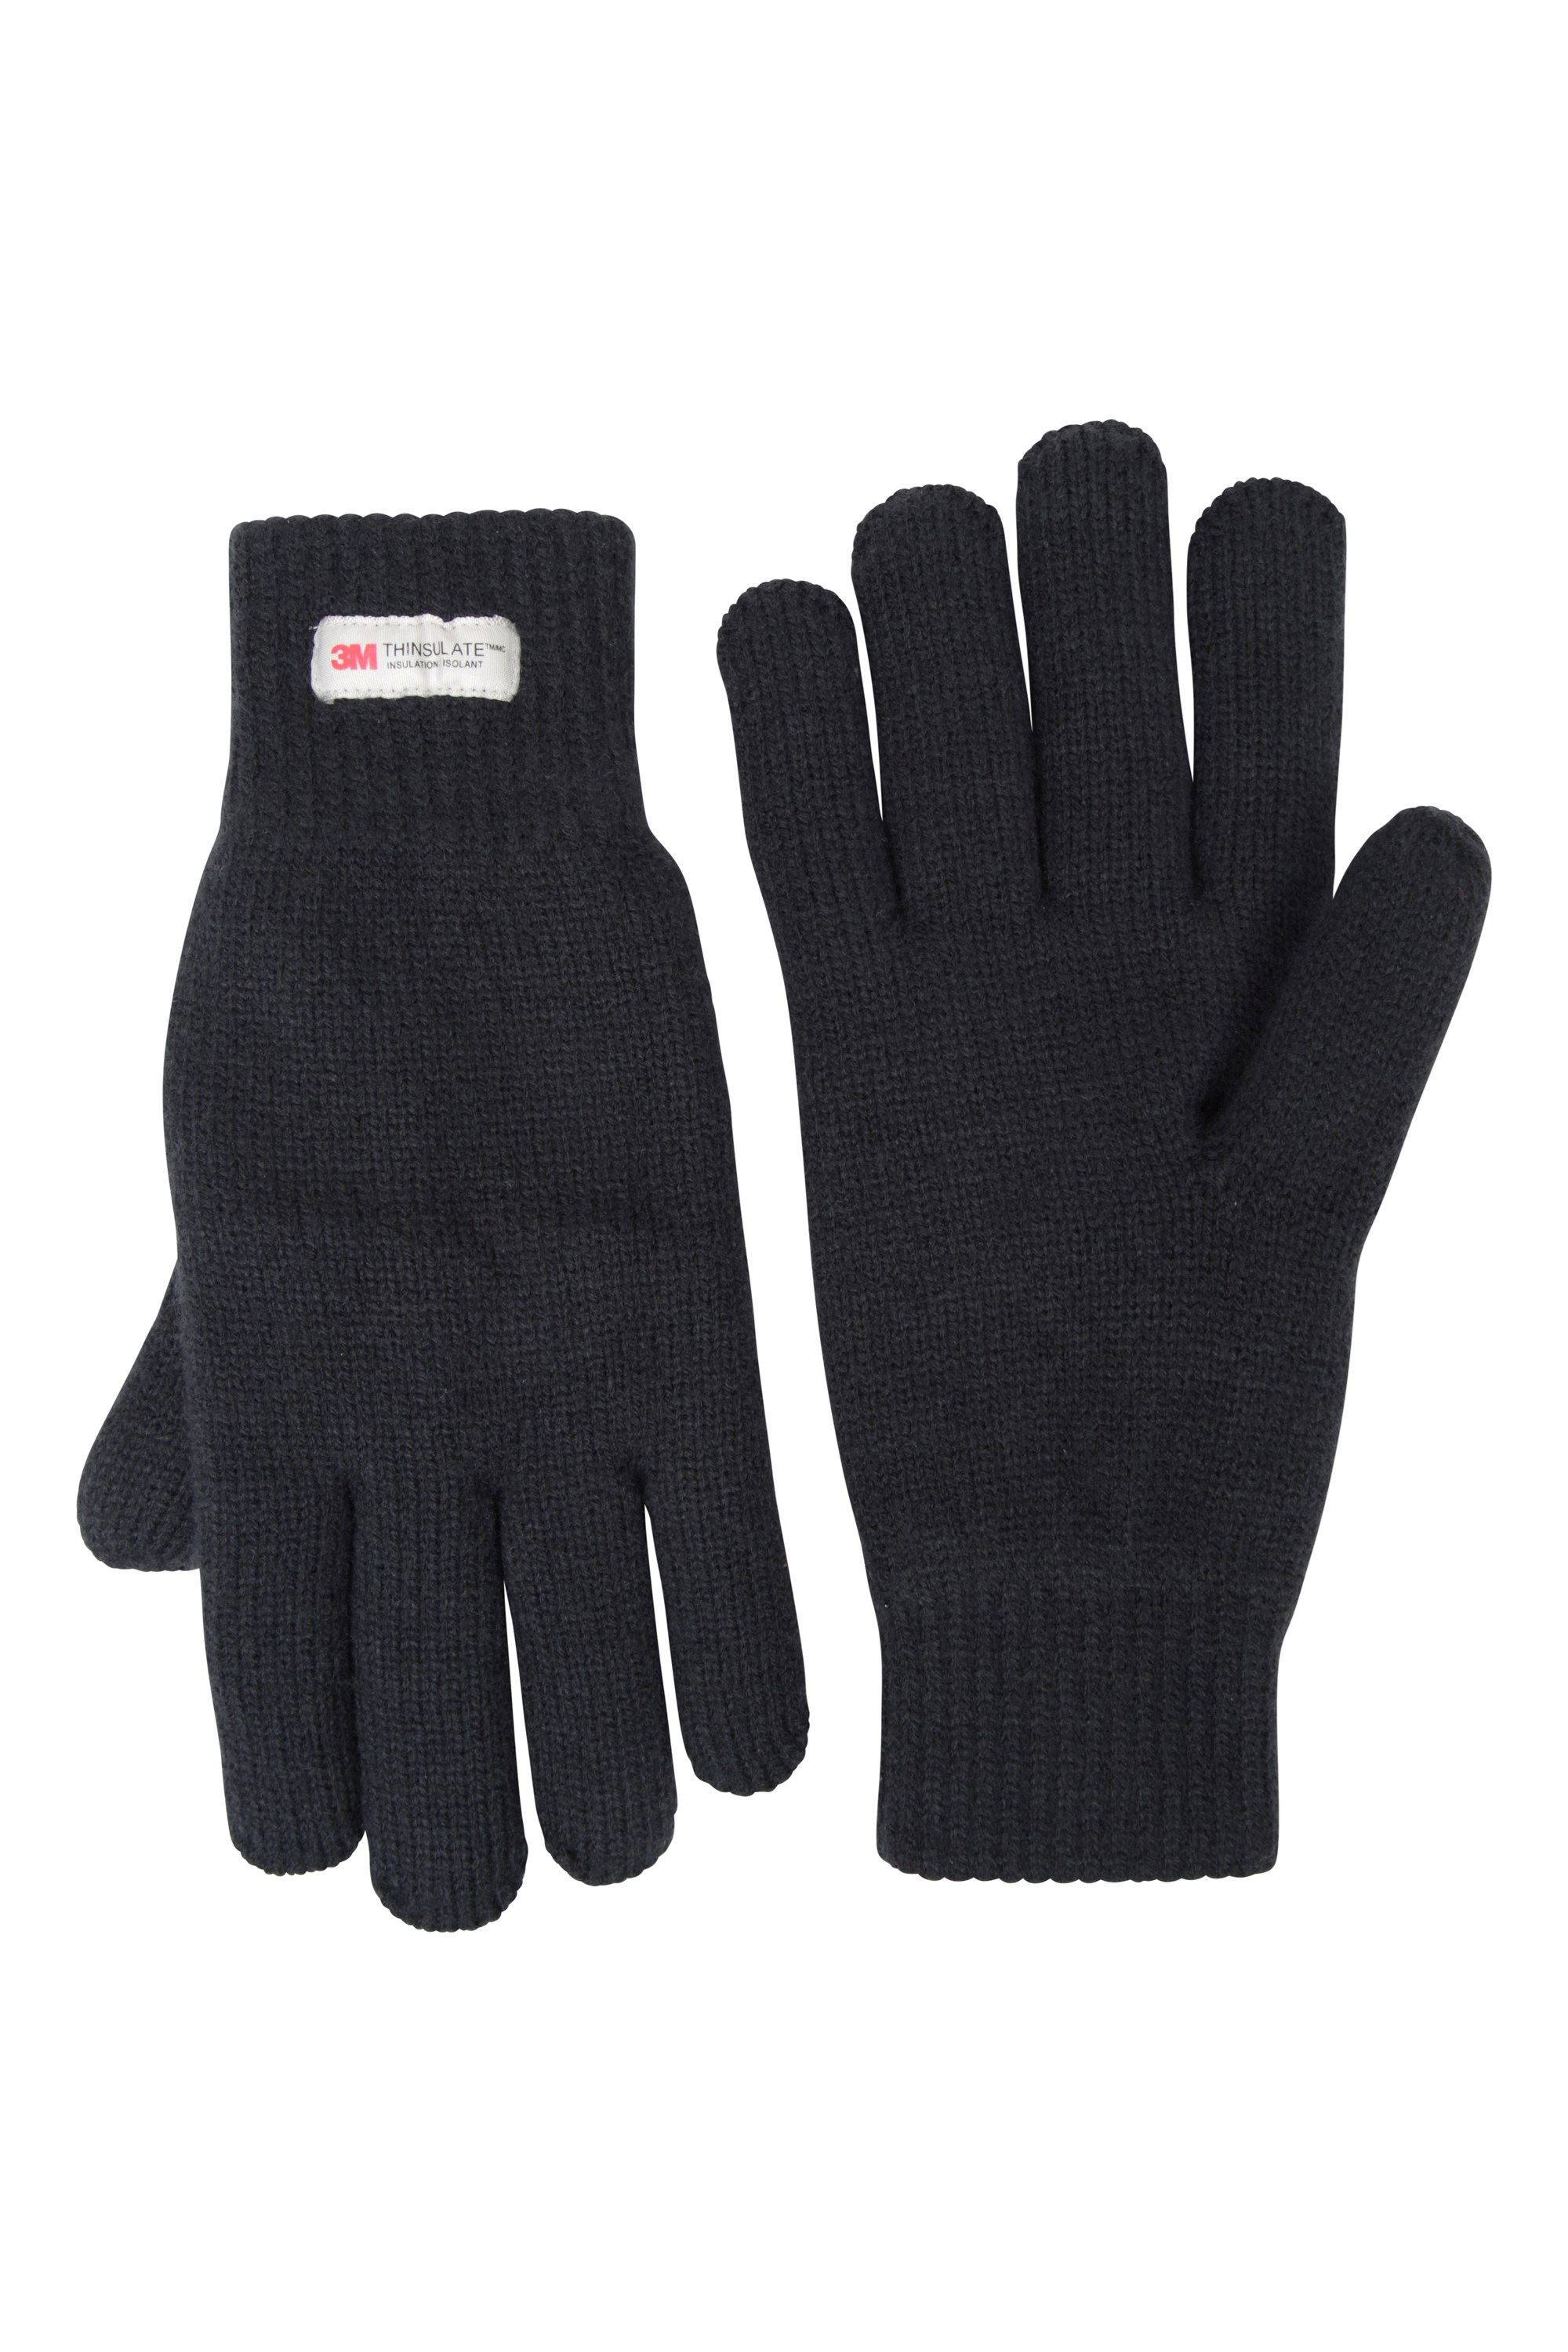 Thinsulate Mens Knitted Gloves - Navy